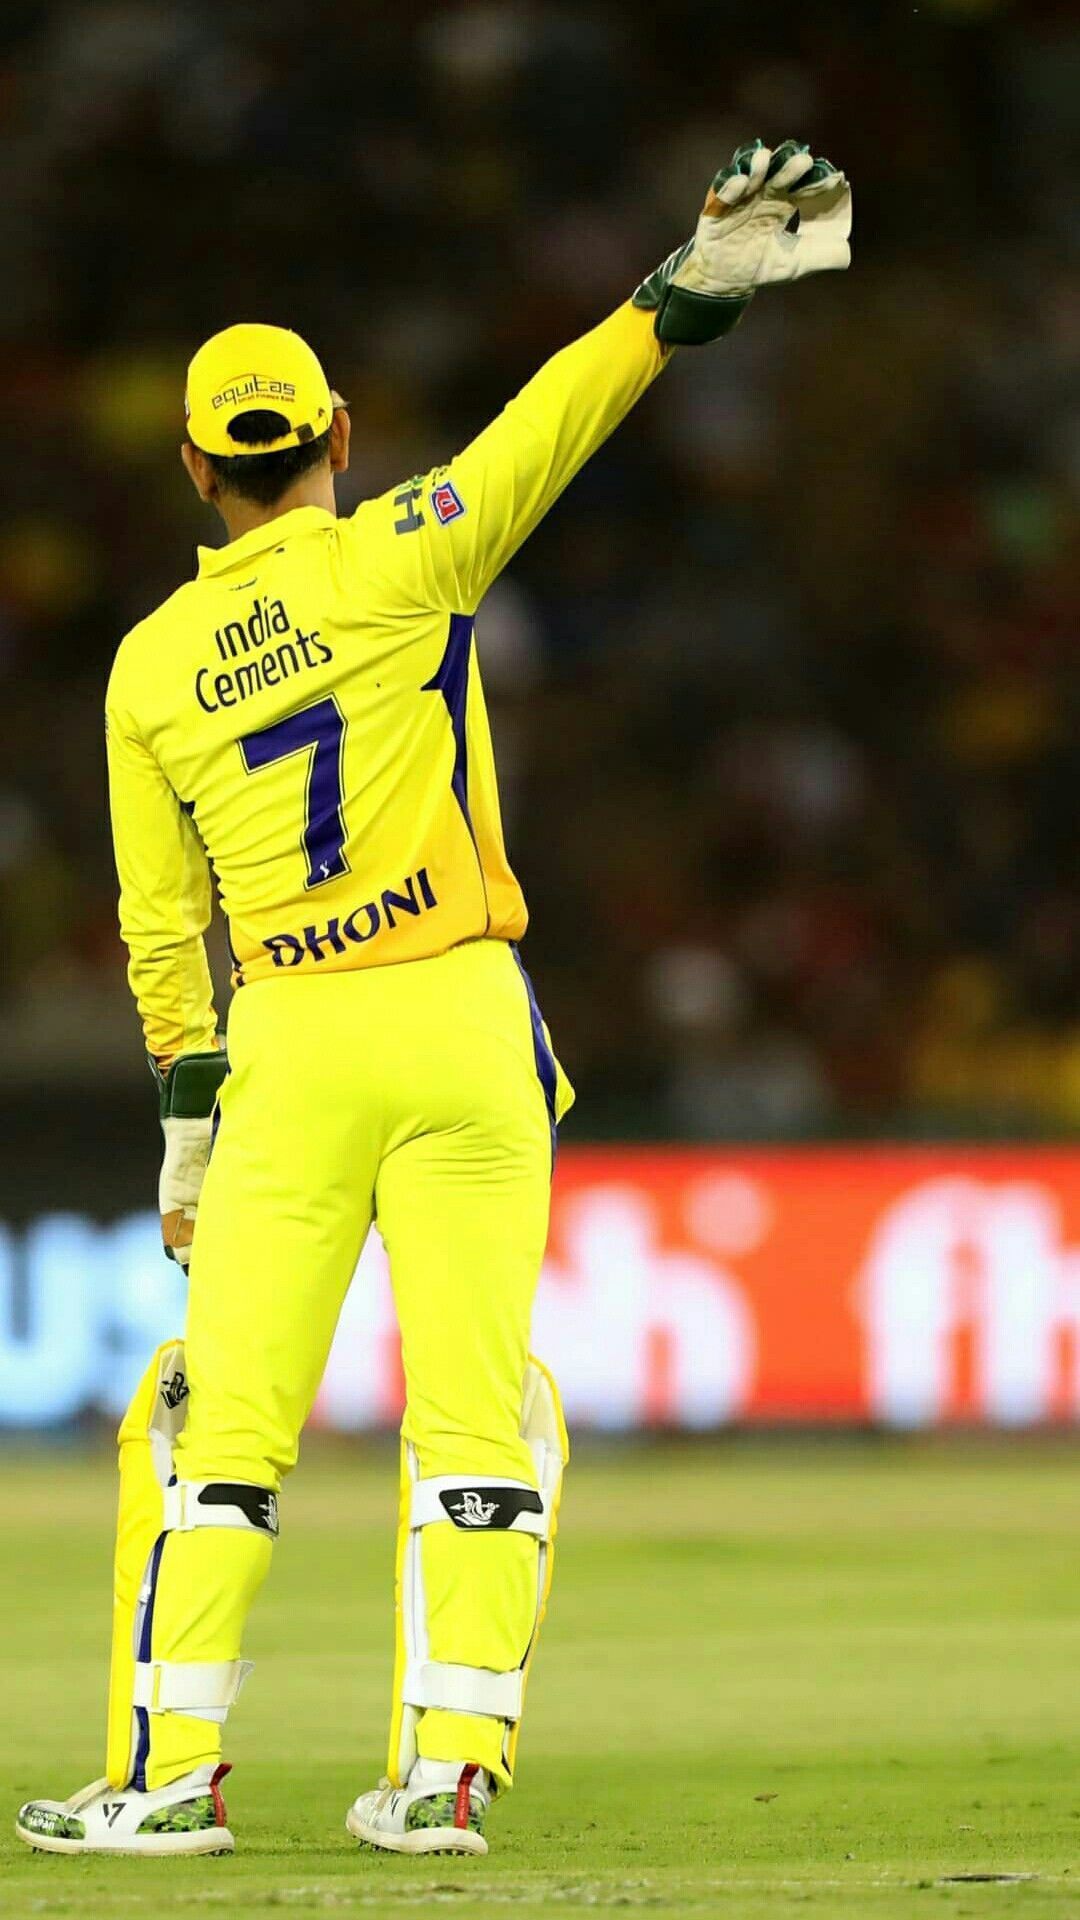 Csk Wallpaper HD Resolution For iPhone Wallpaper on Hupages.com, if you like it dont forget save it or. Dhoni wallpaper, Ms dhoni wallpaper, Cricket wallpaper